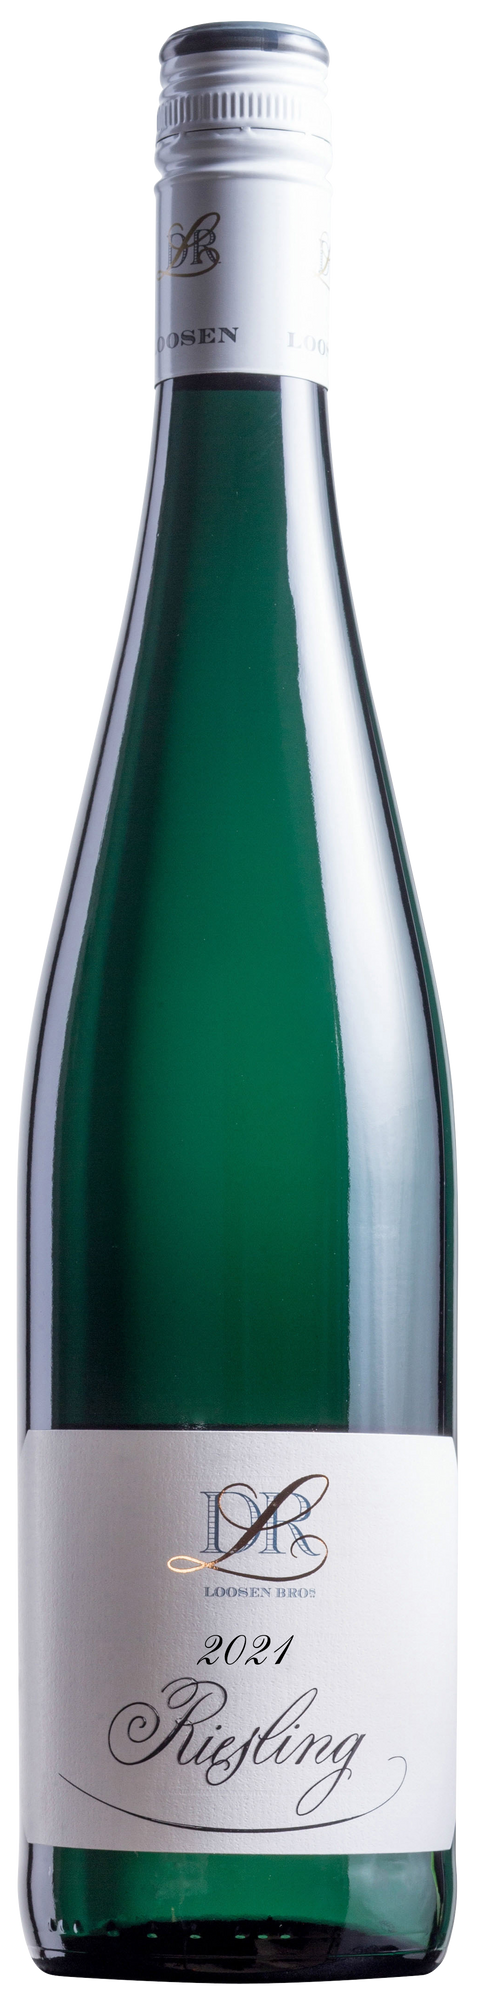 2022 Dr Loosen Riesling "Dr L", Mosel, Germany